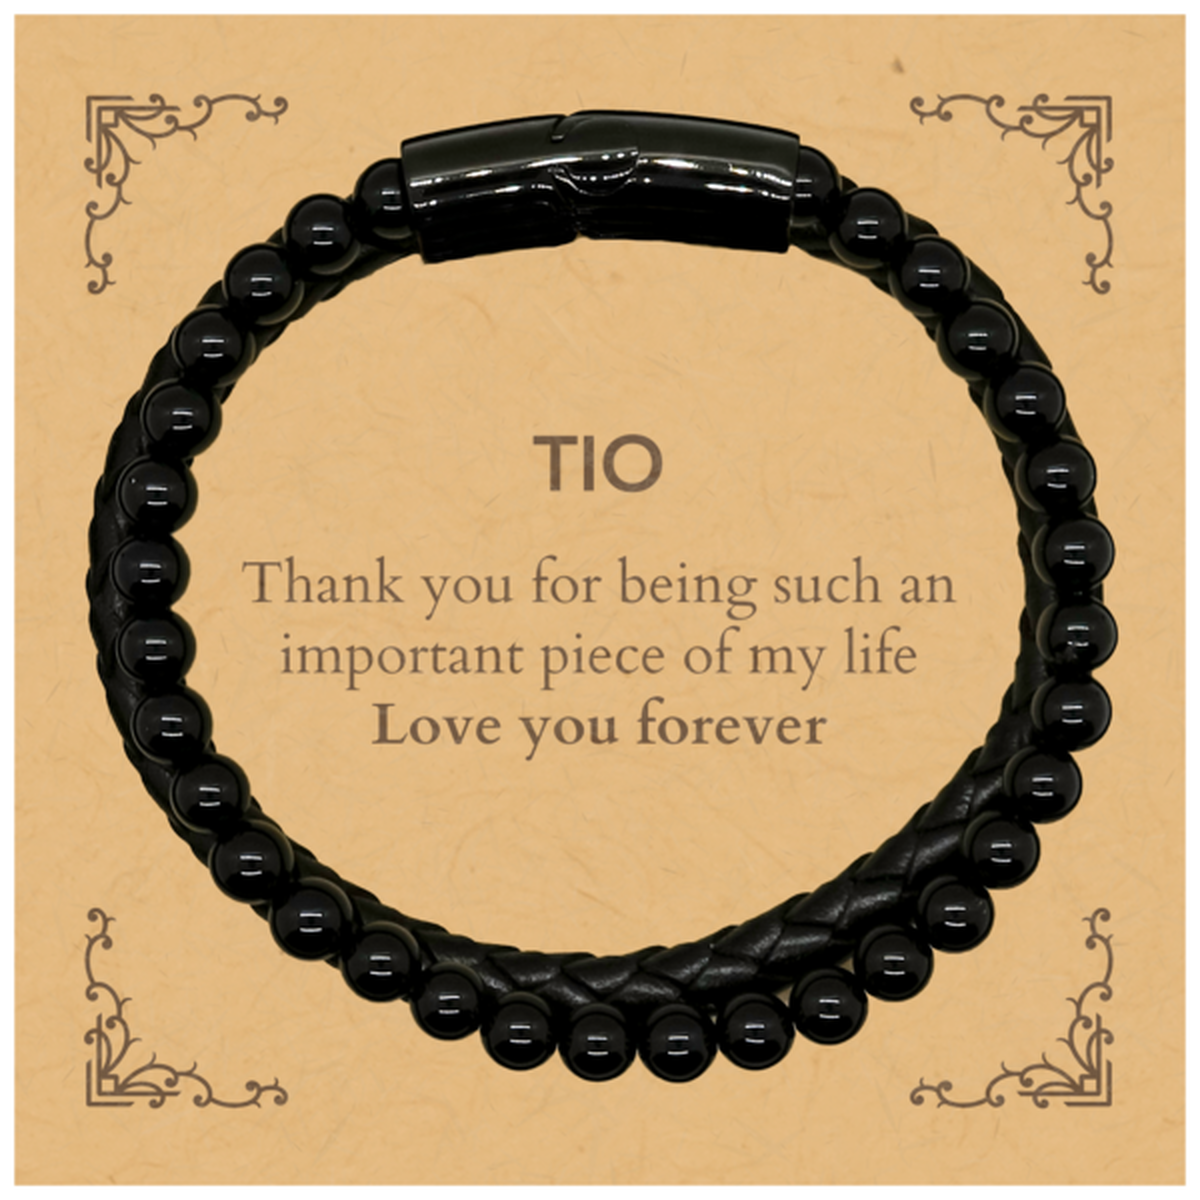 Appropriate Tio Stone Leather Bracelets Epic Birthday Gifts for Tio Thank you for being such an important piece of my life Tio Christmas Mothers Fathers Day